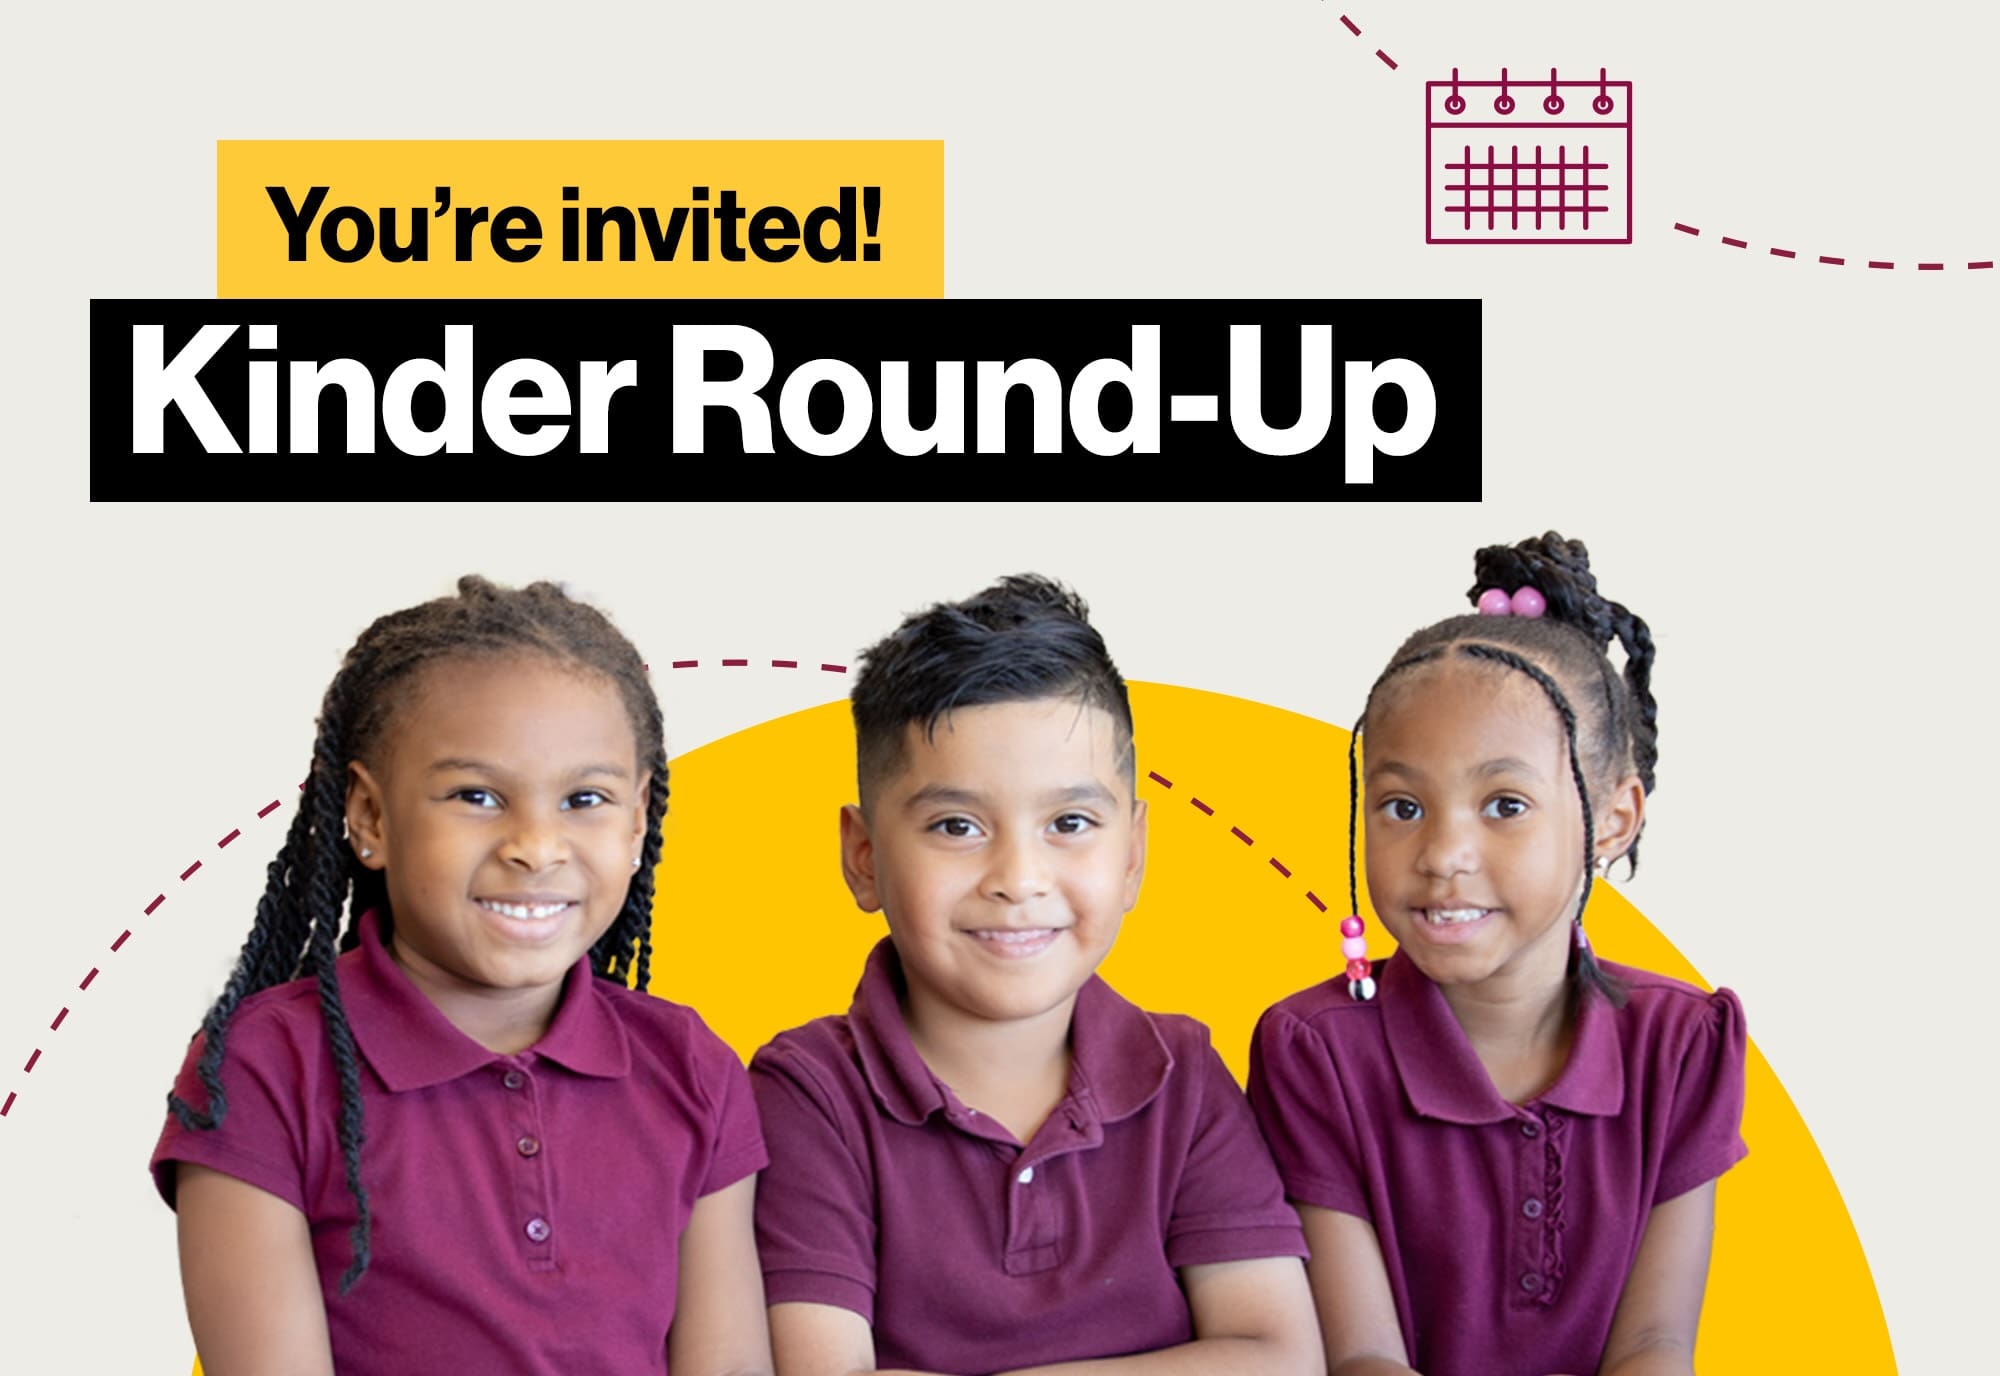 You're Invited! Kinder Round-Up